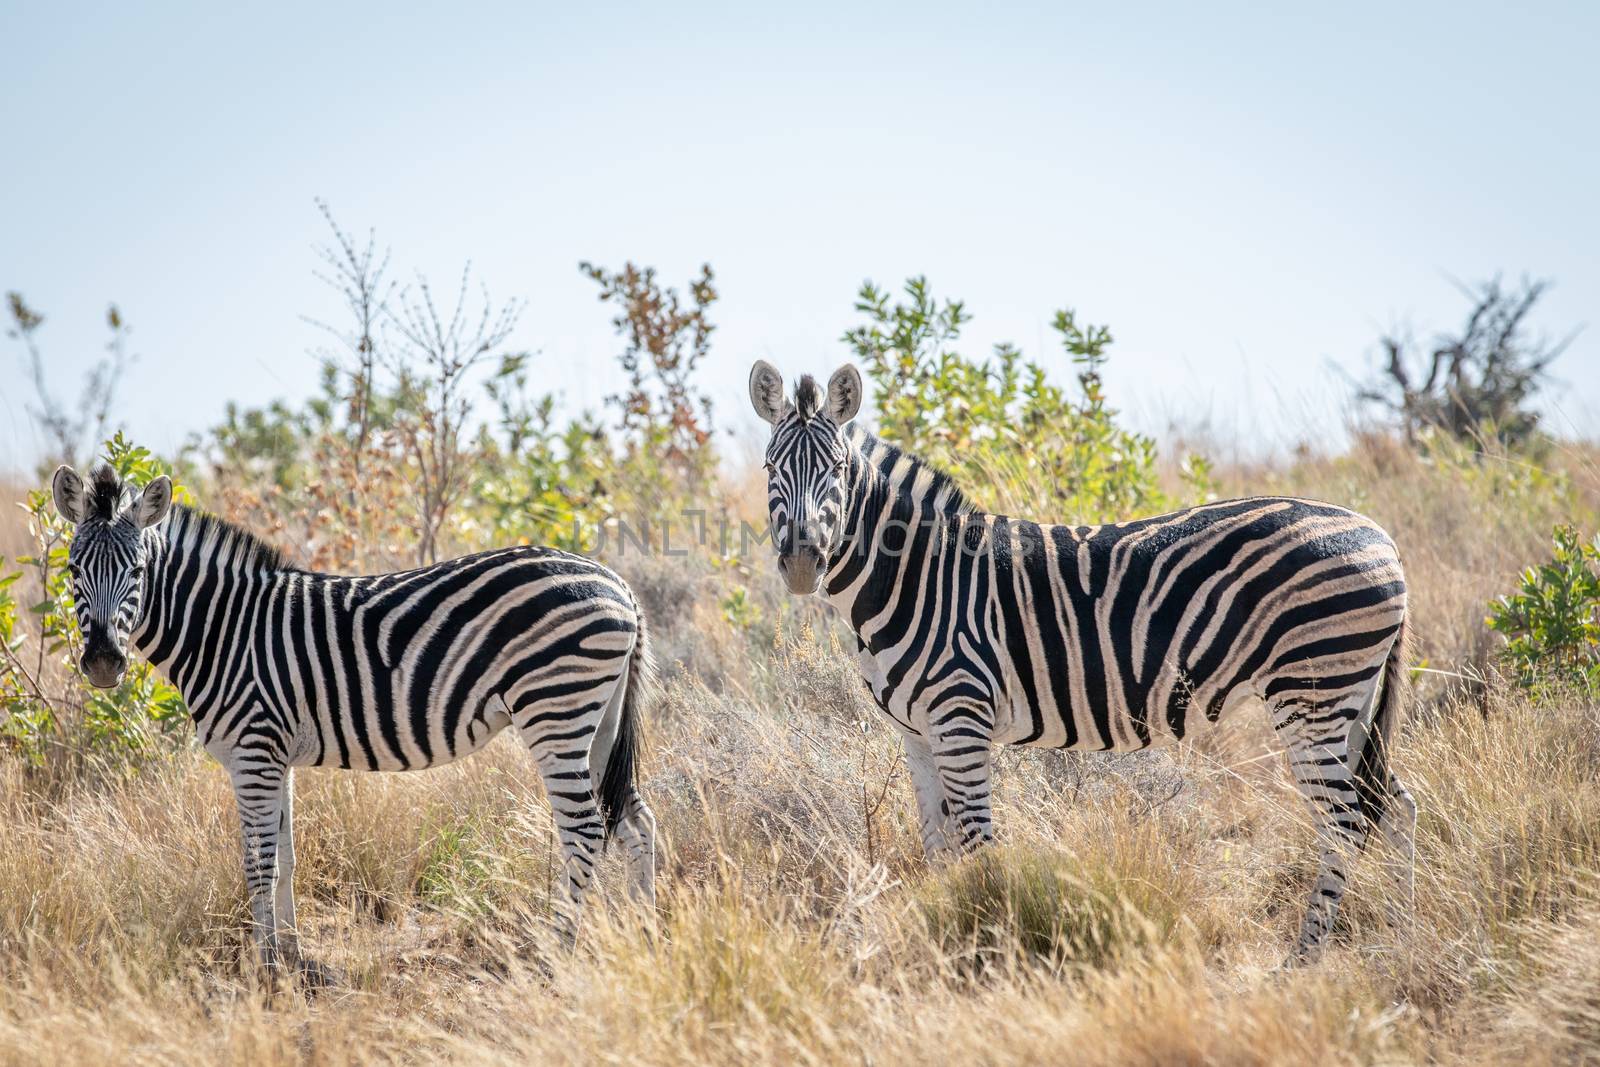 Zebra standing in the high grass. by Simoneemanphotography